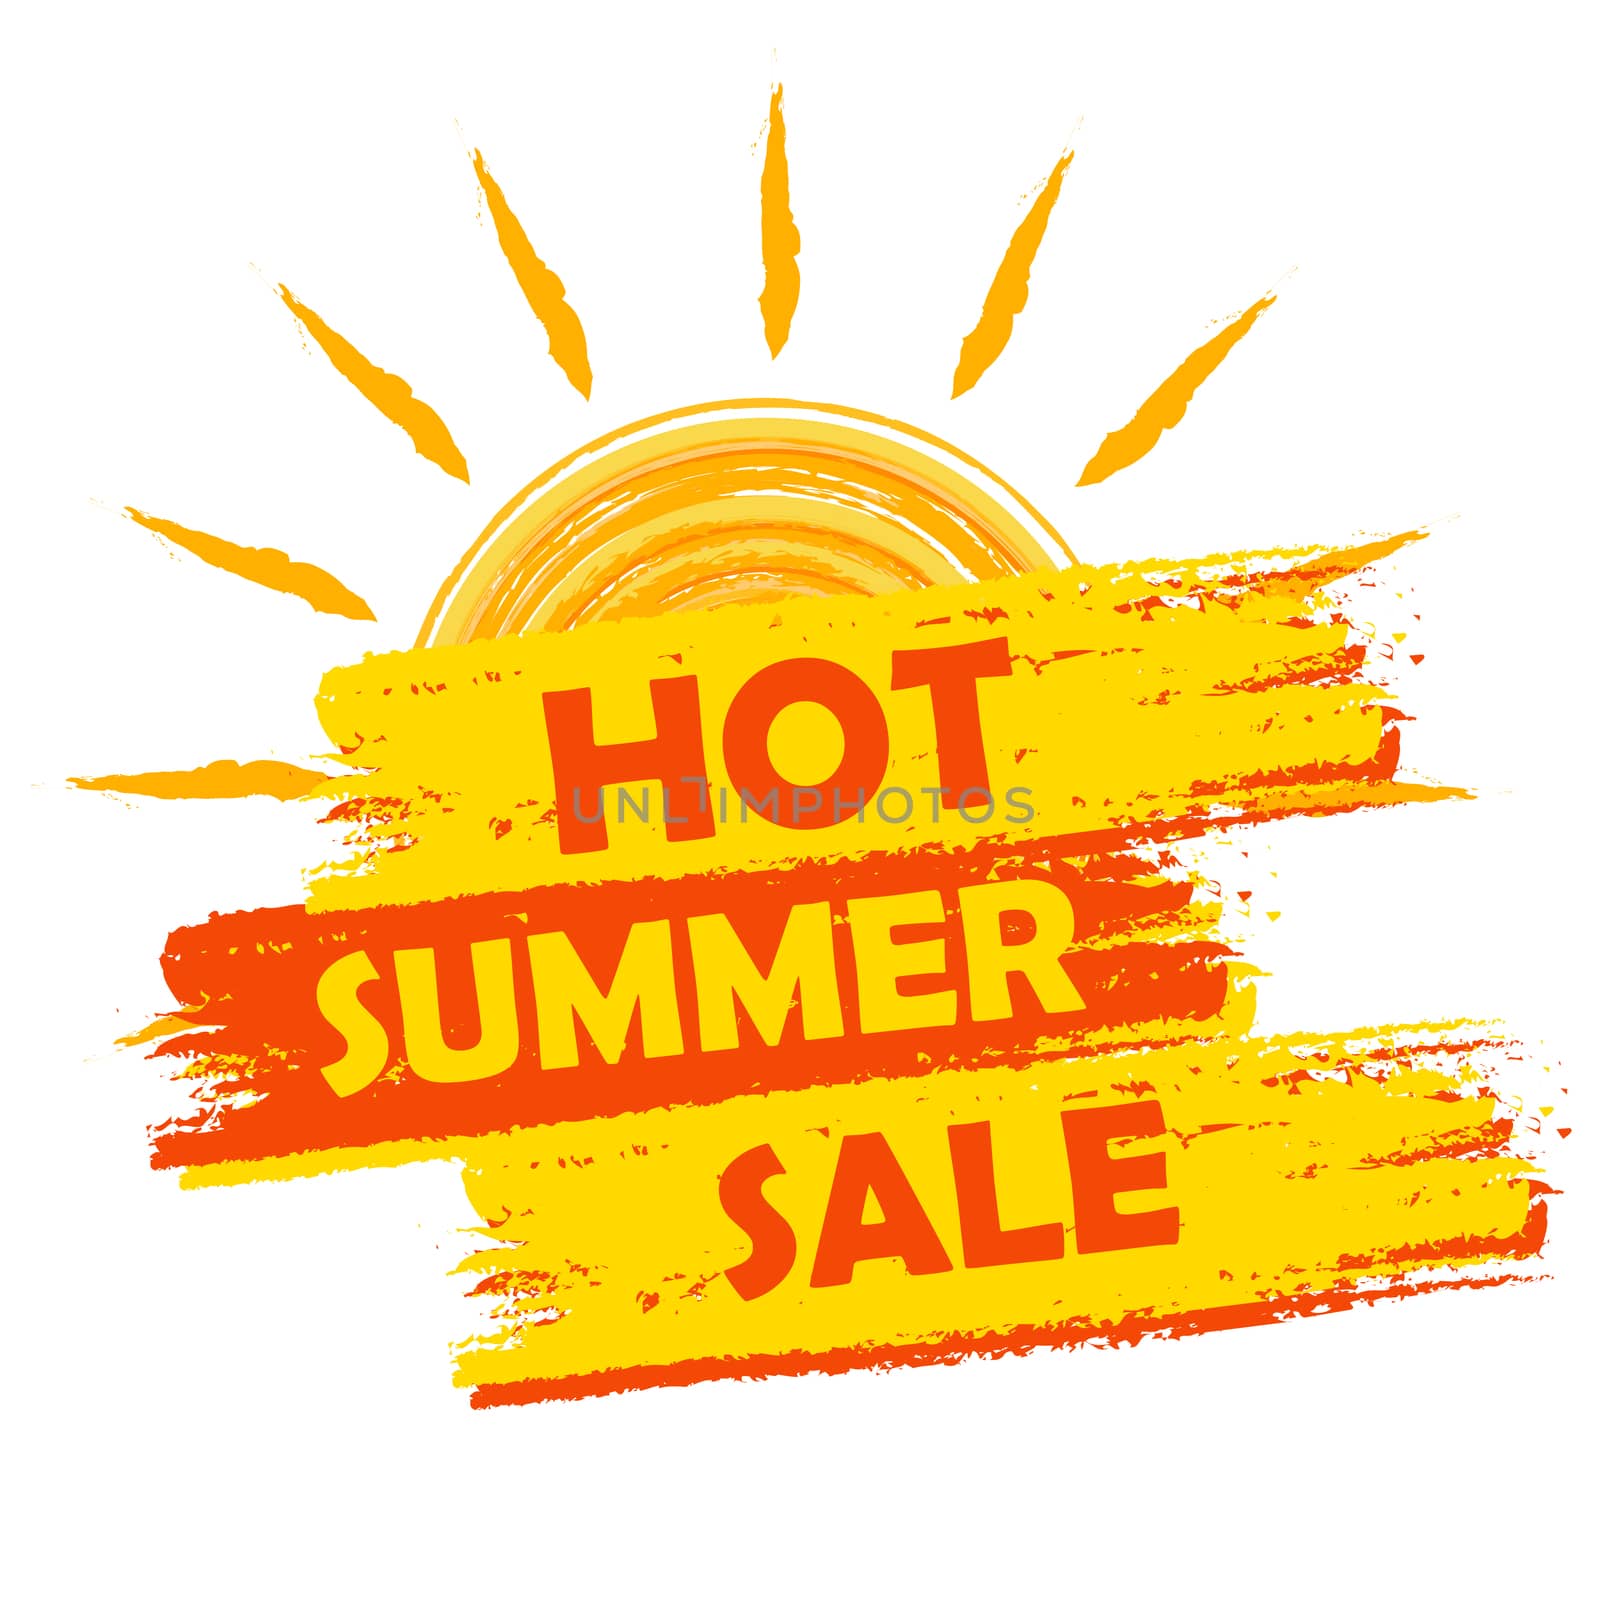 hot summer sale banner - text in yellow and orange drawn label with sun symbol, business seasonal shopping concept